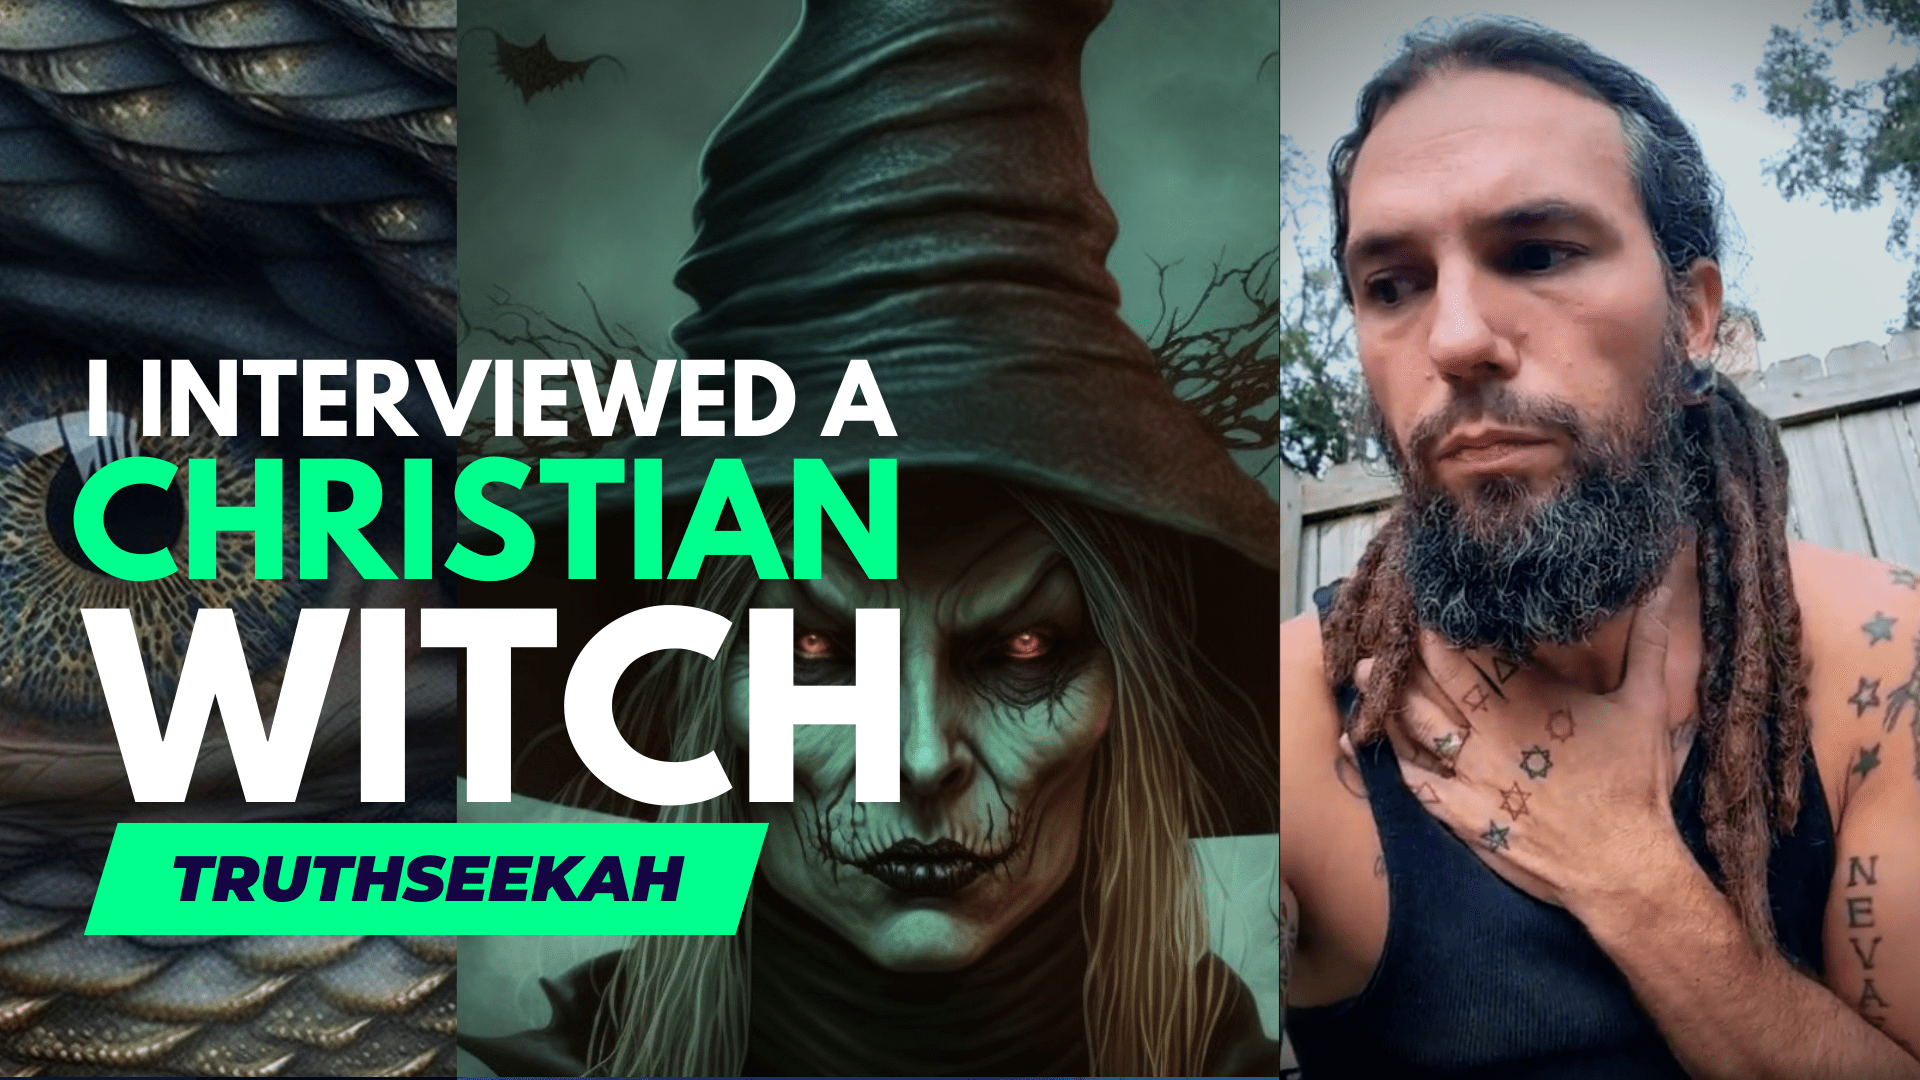 Removing The Titles To See People Like Jesus Does. – Post Christian Witch Interview Livestream